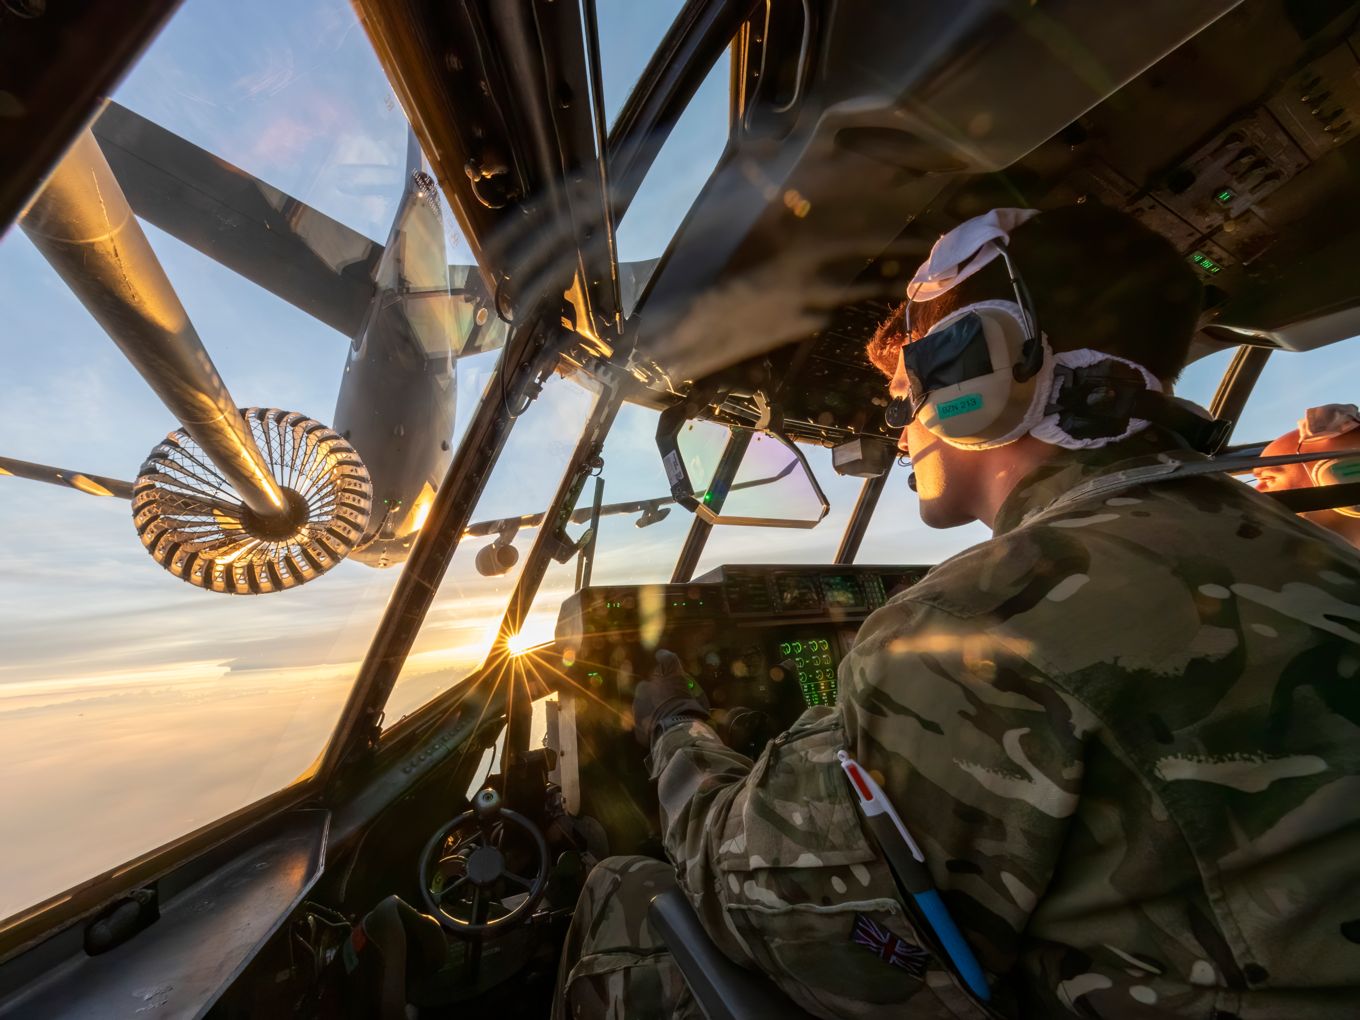 Pictured, a Pilot from 47 Squadron preparing to conduct Air-to-Air Refuelling from the RAF’s Voyager